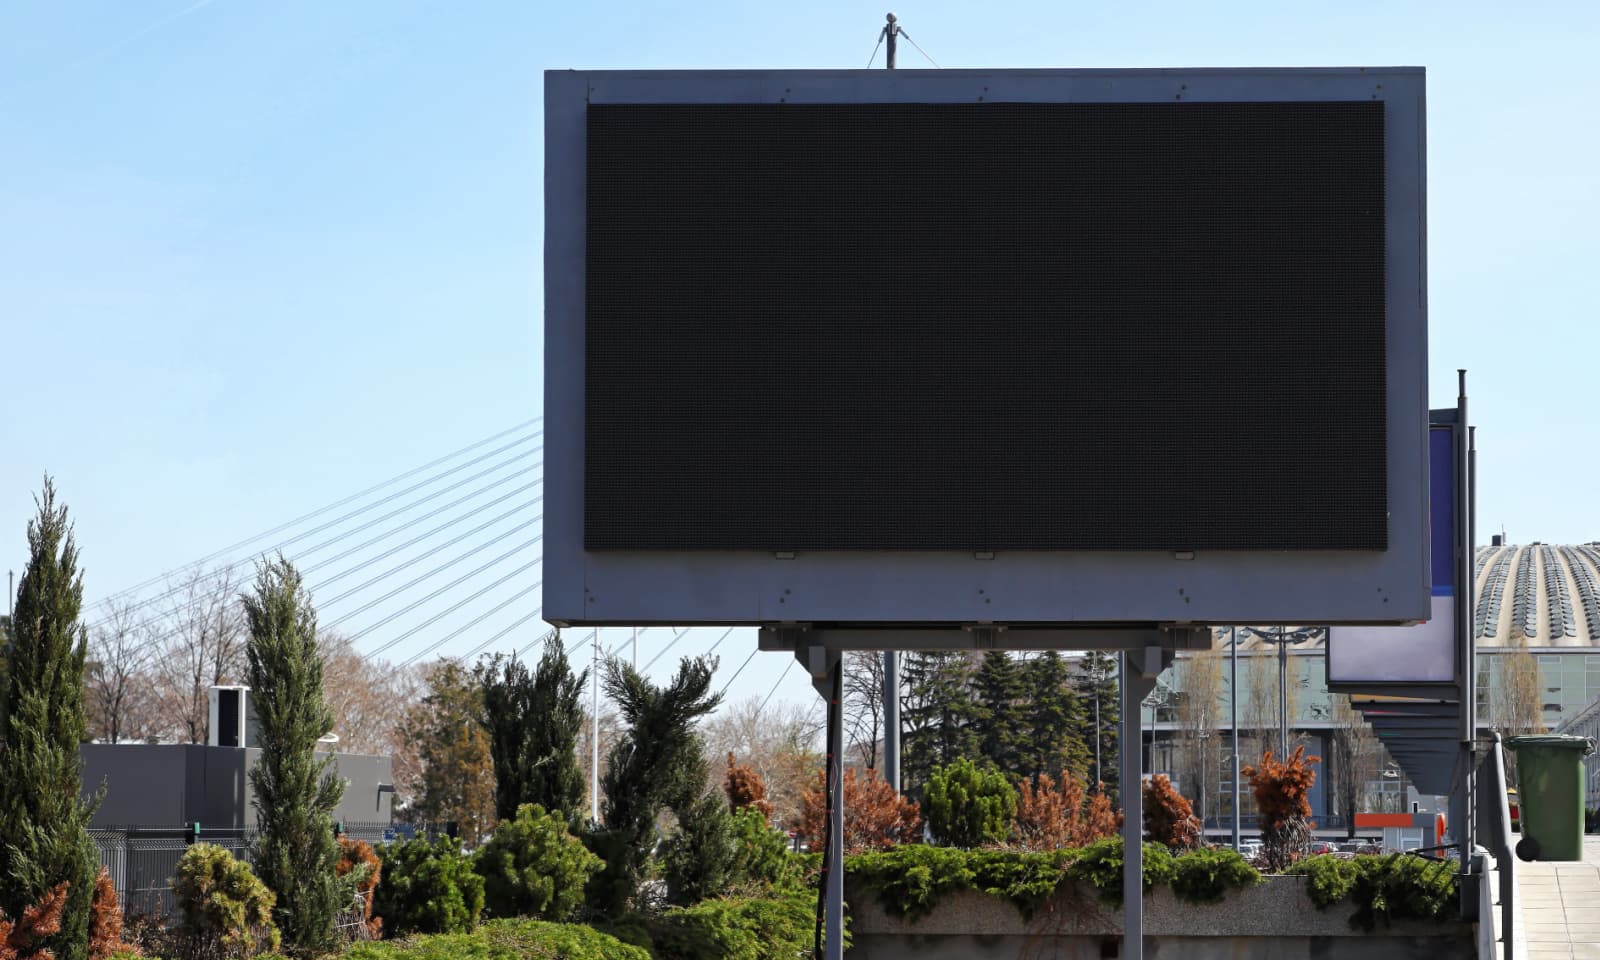 LED screen outdoors